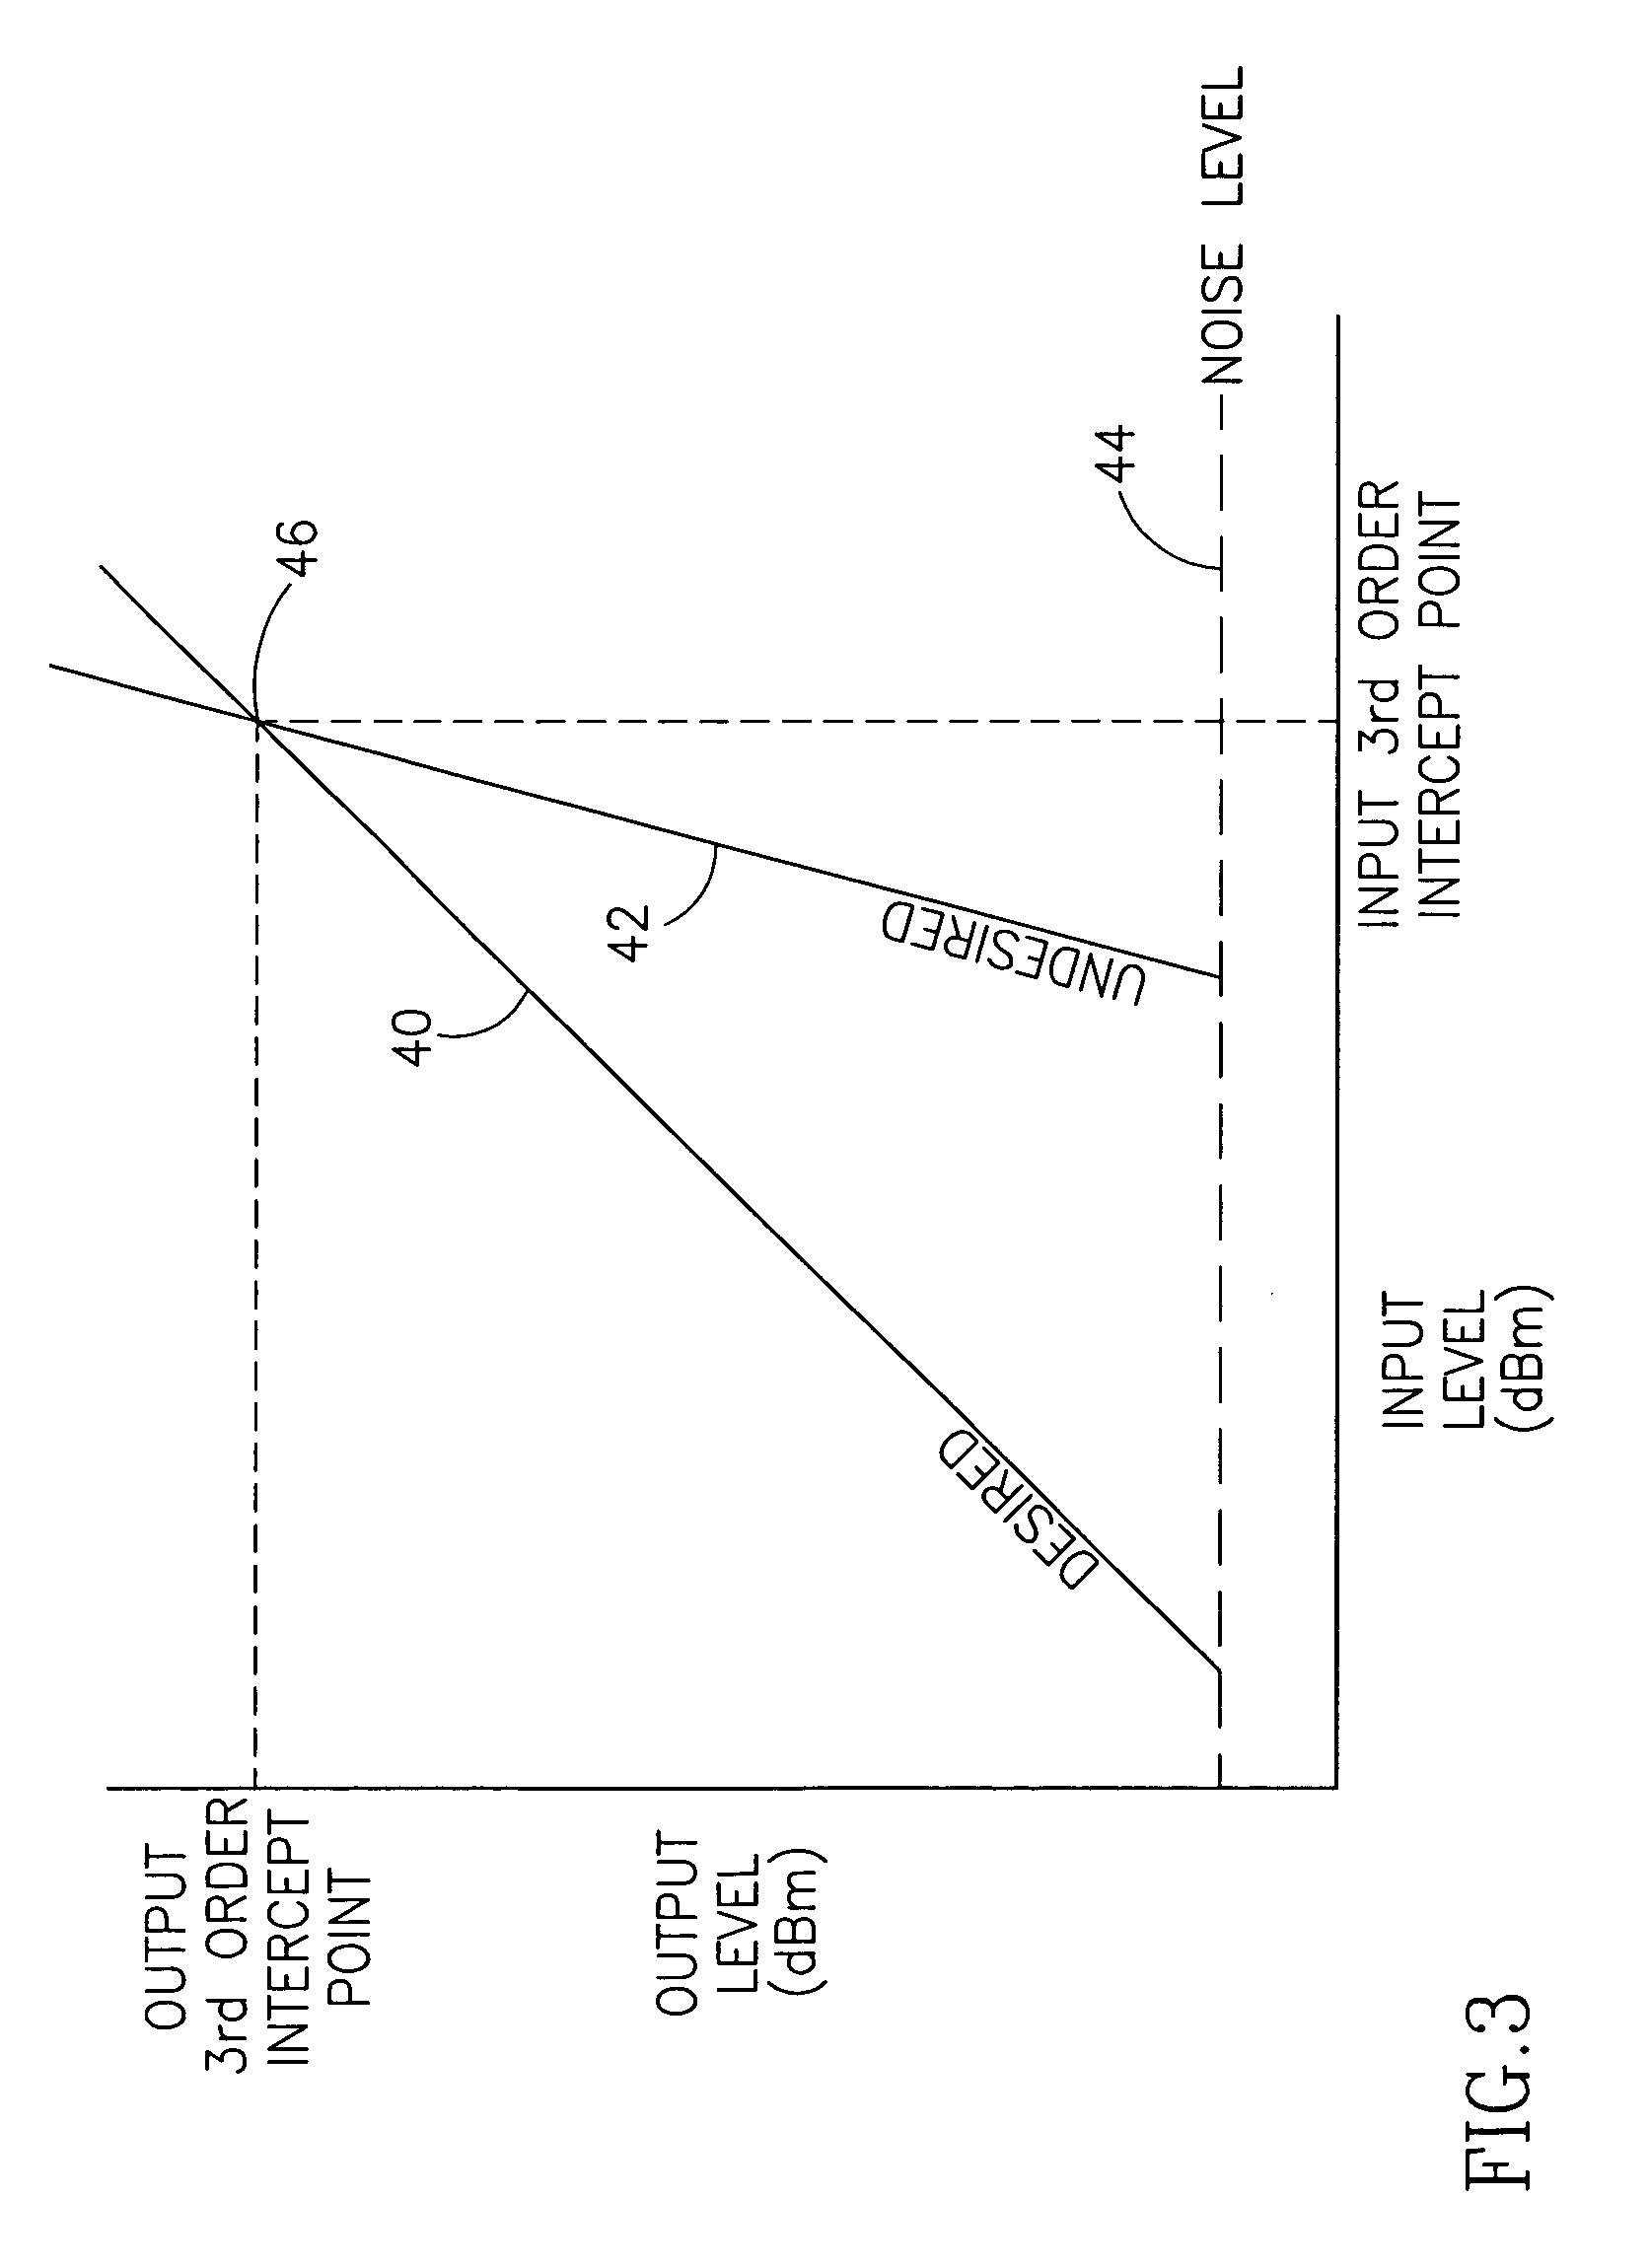 Apparatus for and method of optimizing the performance of a radio frequency receiver in the presence of interference